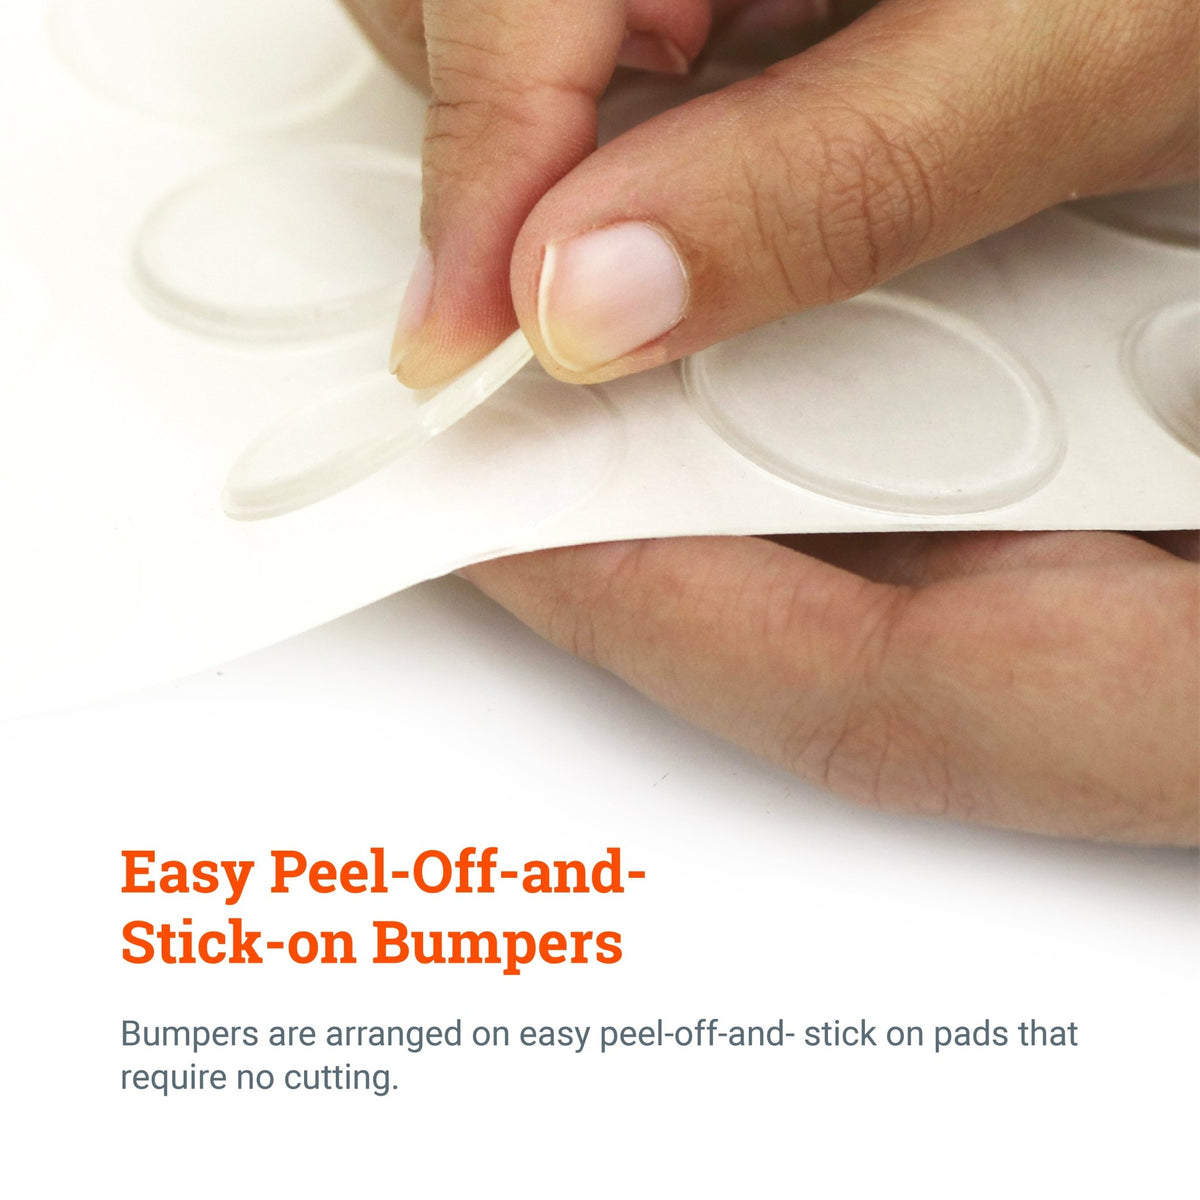 Easy Peel-Off-and-Stick Clear Adhesive Rubber Bumpers for Hanging Pictures - 1.23” (31.24mm) Diameter and .10” (2.54mm) in Height - BMP-1RND16 - Picture Hang Solutions